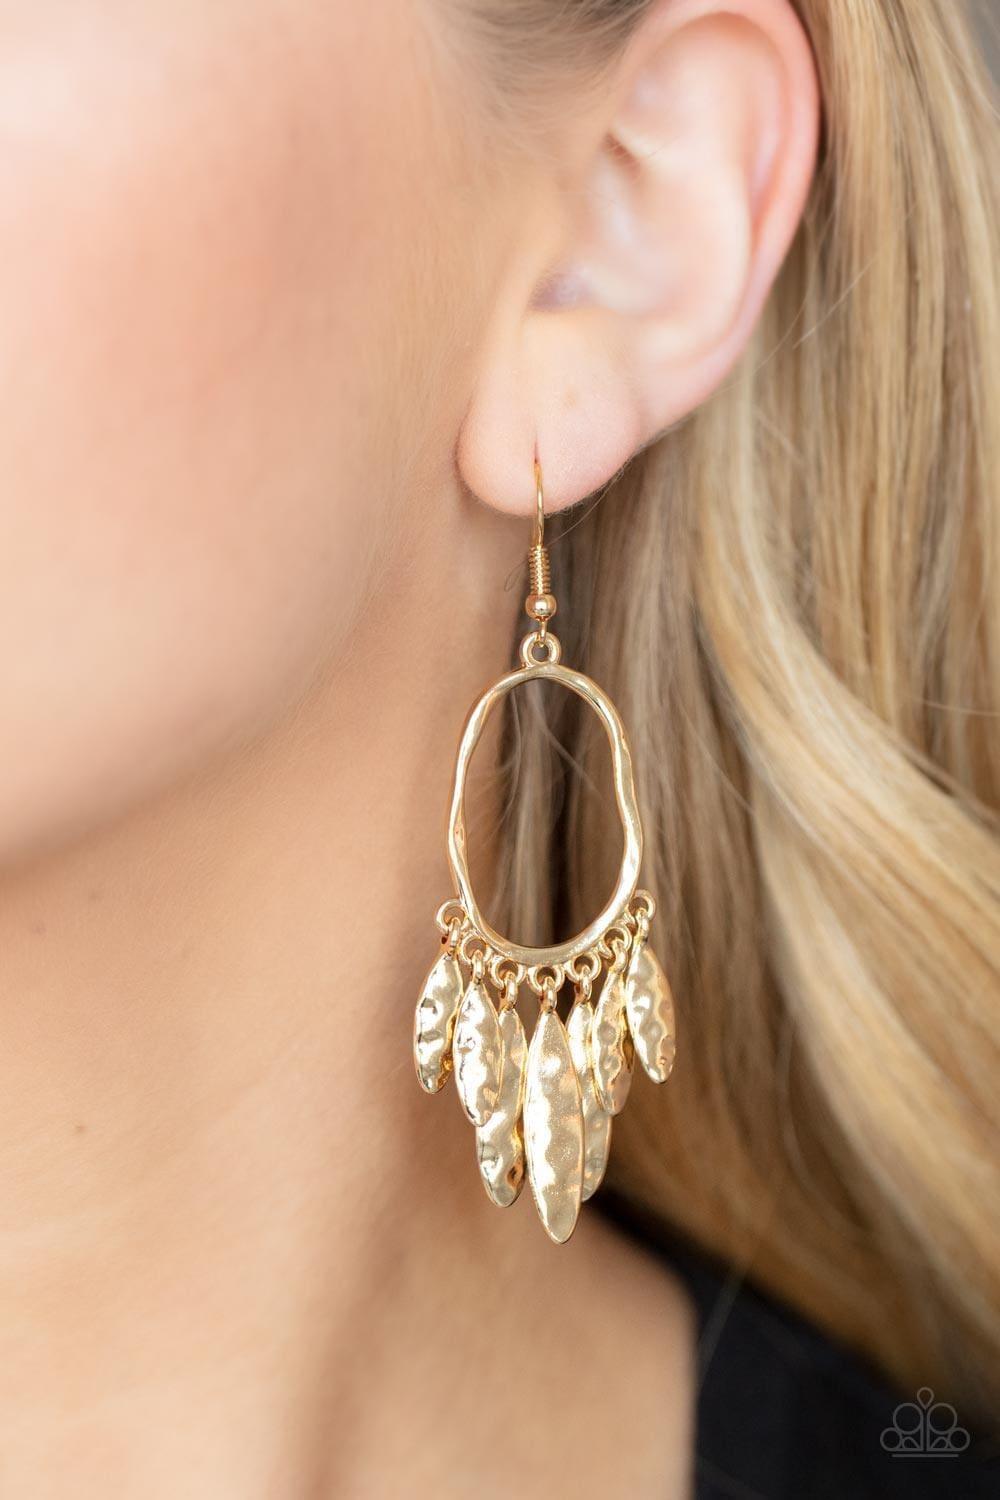 Paparazzi Accessories - Artisan Aria - Gold Earrings - Bling by JessieK